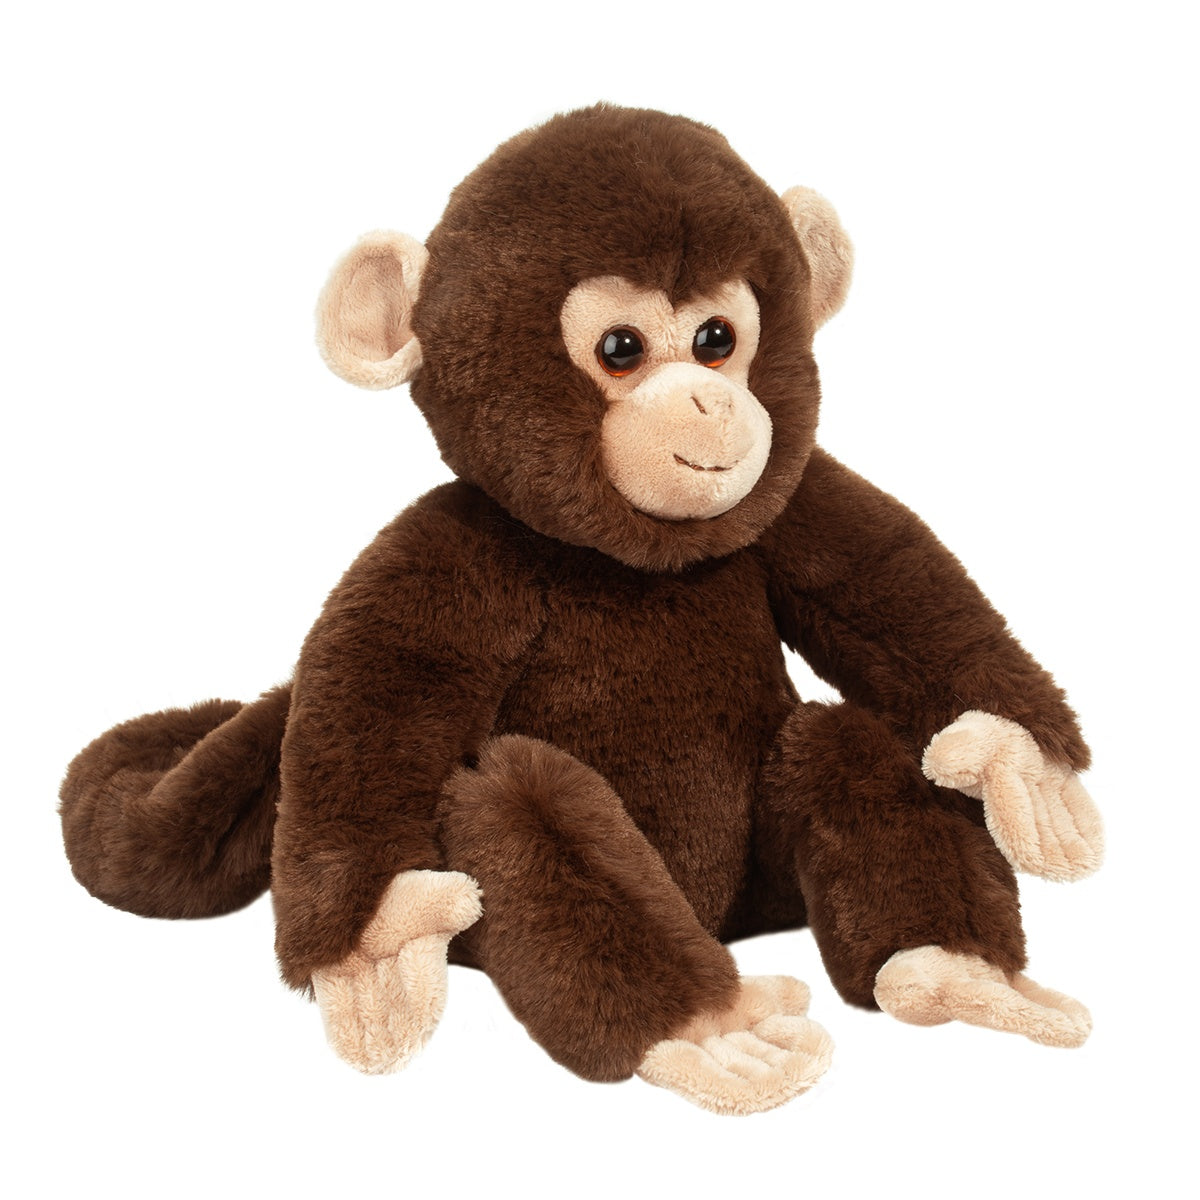 Mikie the Soft Monkey stuffed animal is all smiles and mischief! What will this cheeky Monkey find to get into today? Perhaps she’ll be swinging from the chandelier with her long, fluffy tail.